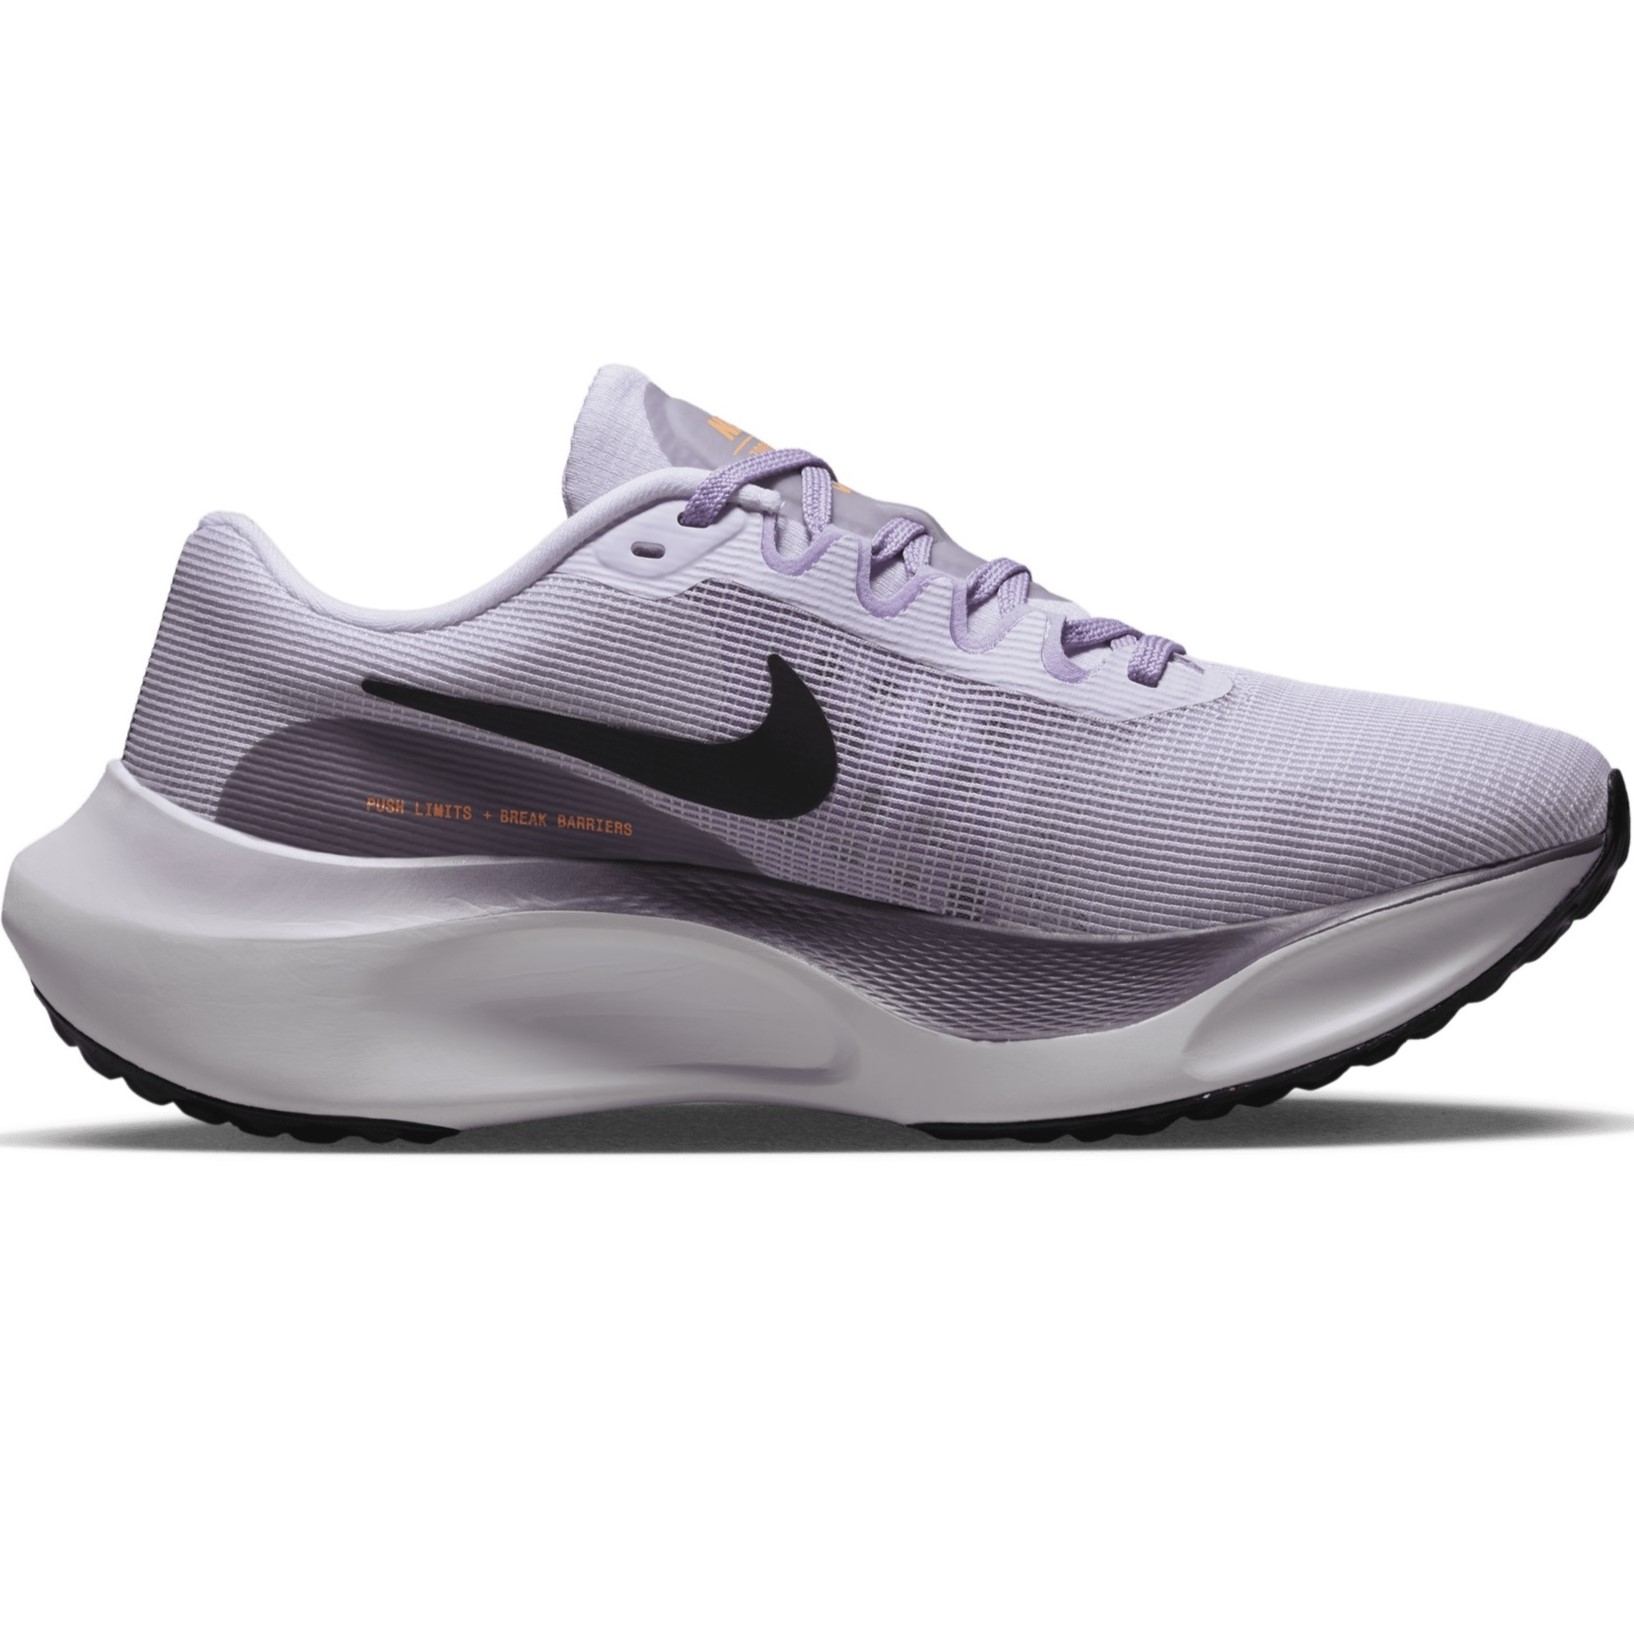 GIÀY NIKE NỮ ZOOM FLY 5 WOMEN ROAD RUNNING SHOES BARELY GRAPE DM8974-500 1